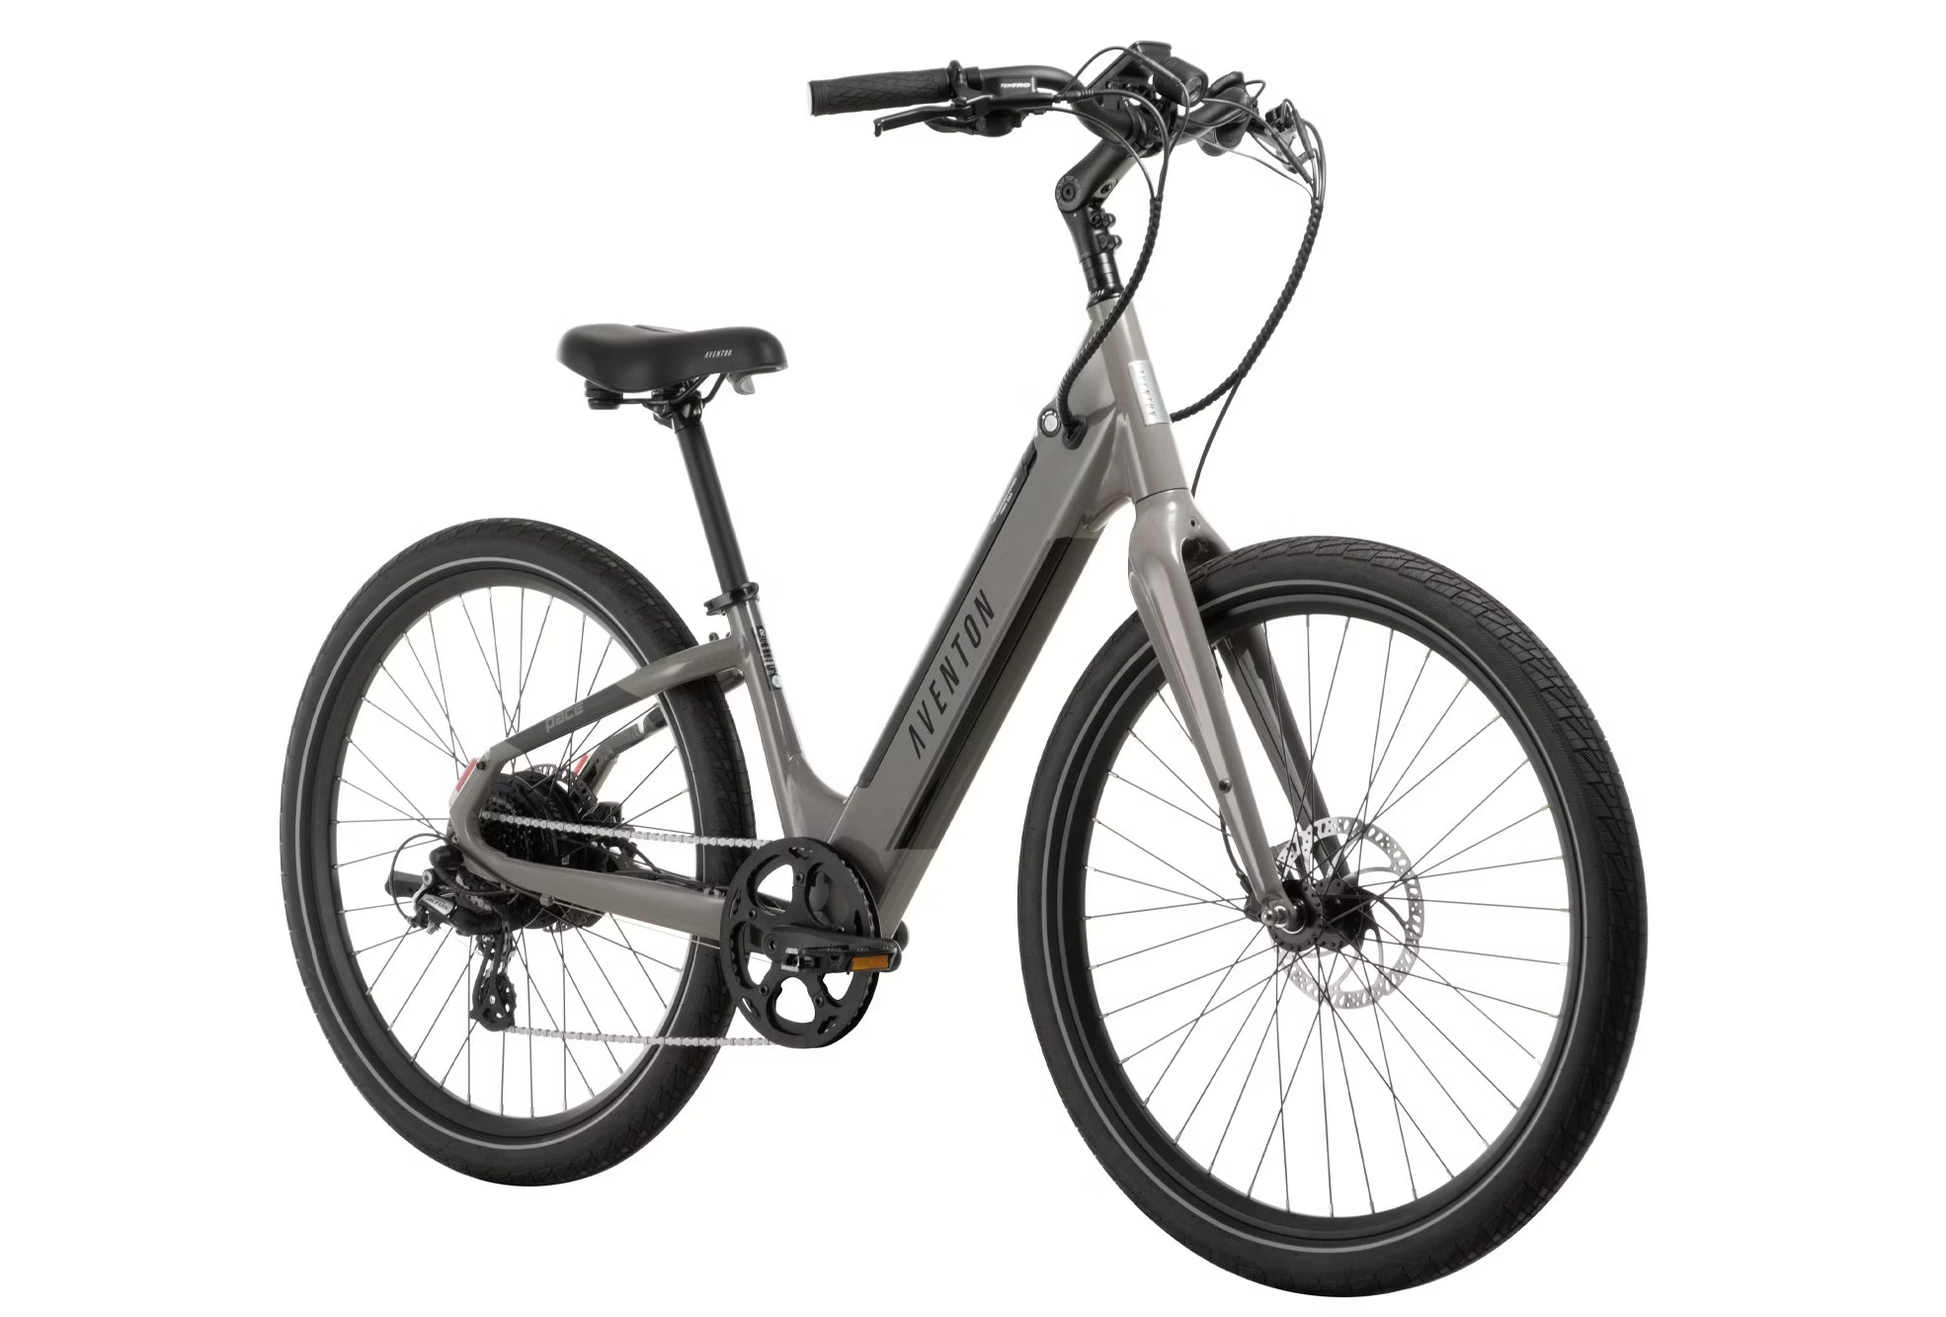 A modern Aventon electric bike with a 500W motor, silver frame, black seat and tires, and no visible branding against a white background.